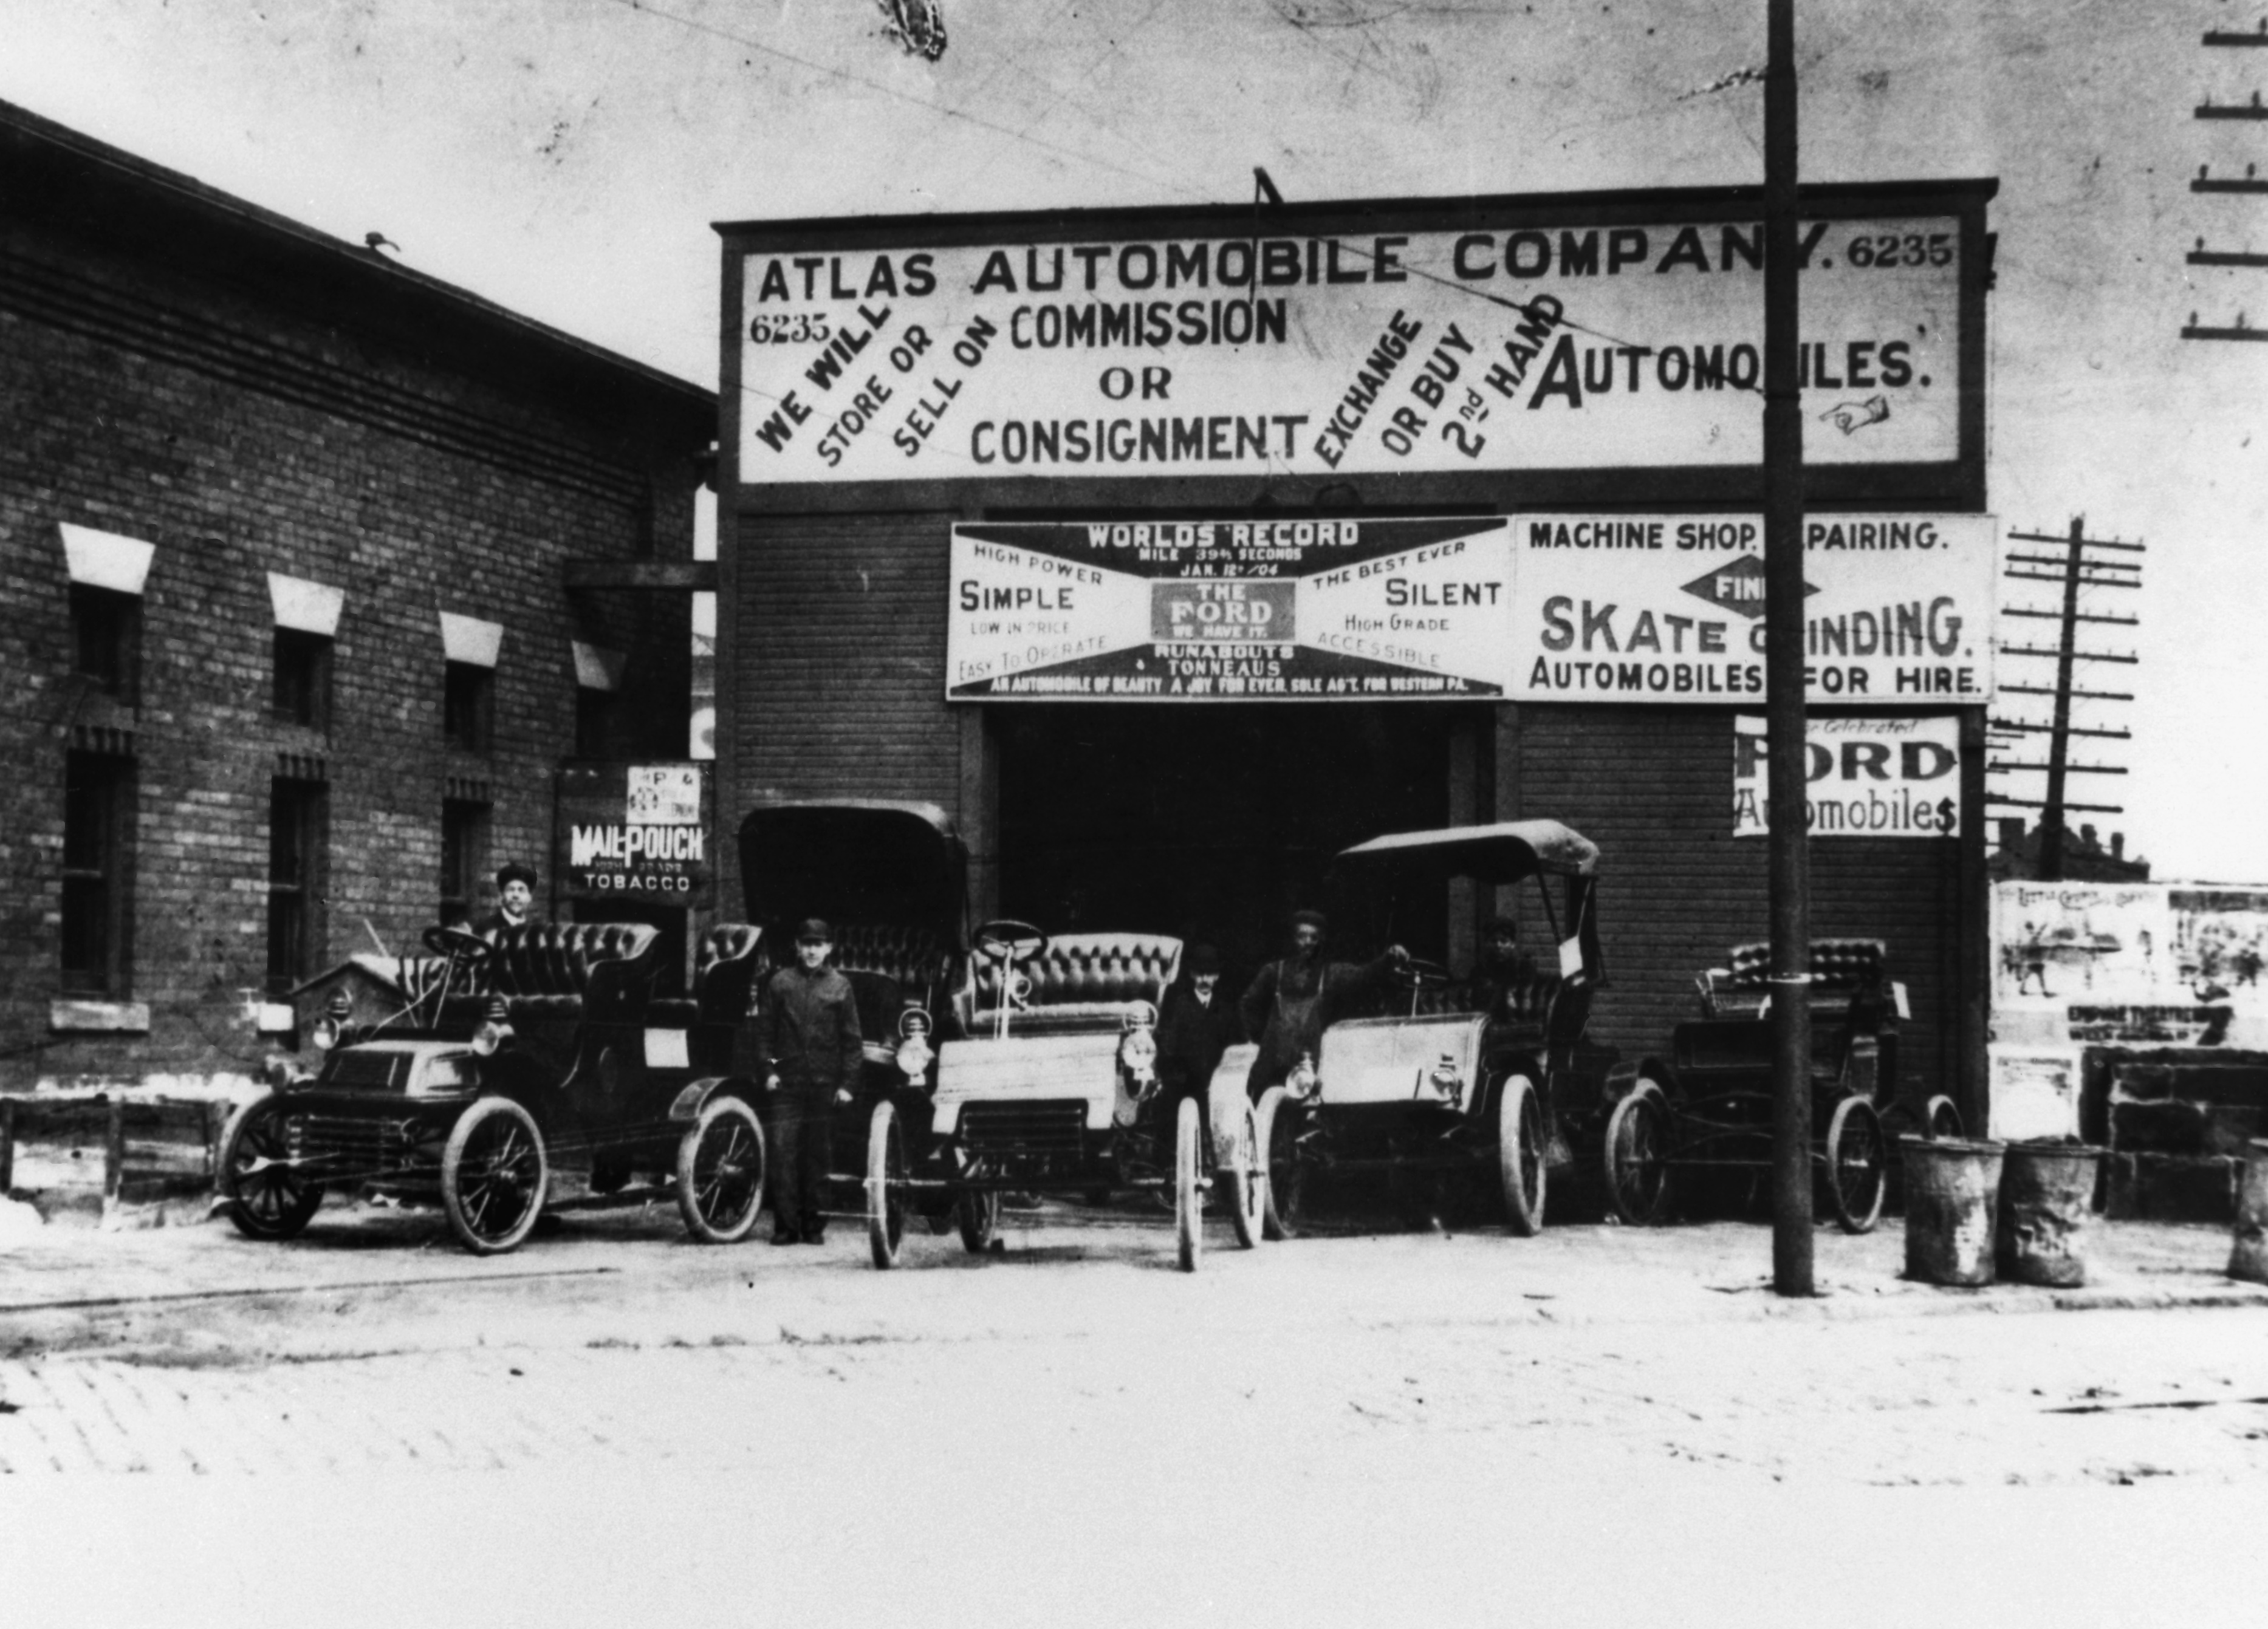 Black and white photograph of cars and staff outside of an early 20th century automobile dealership and service station.